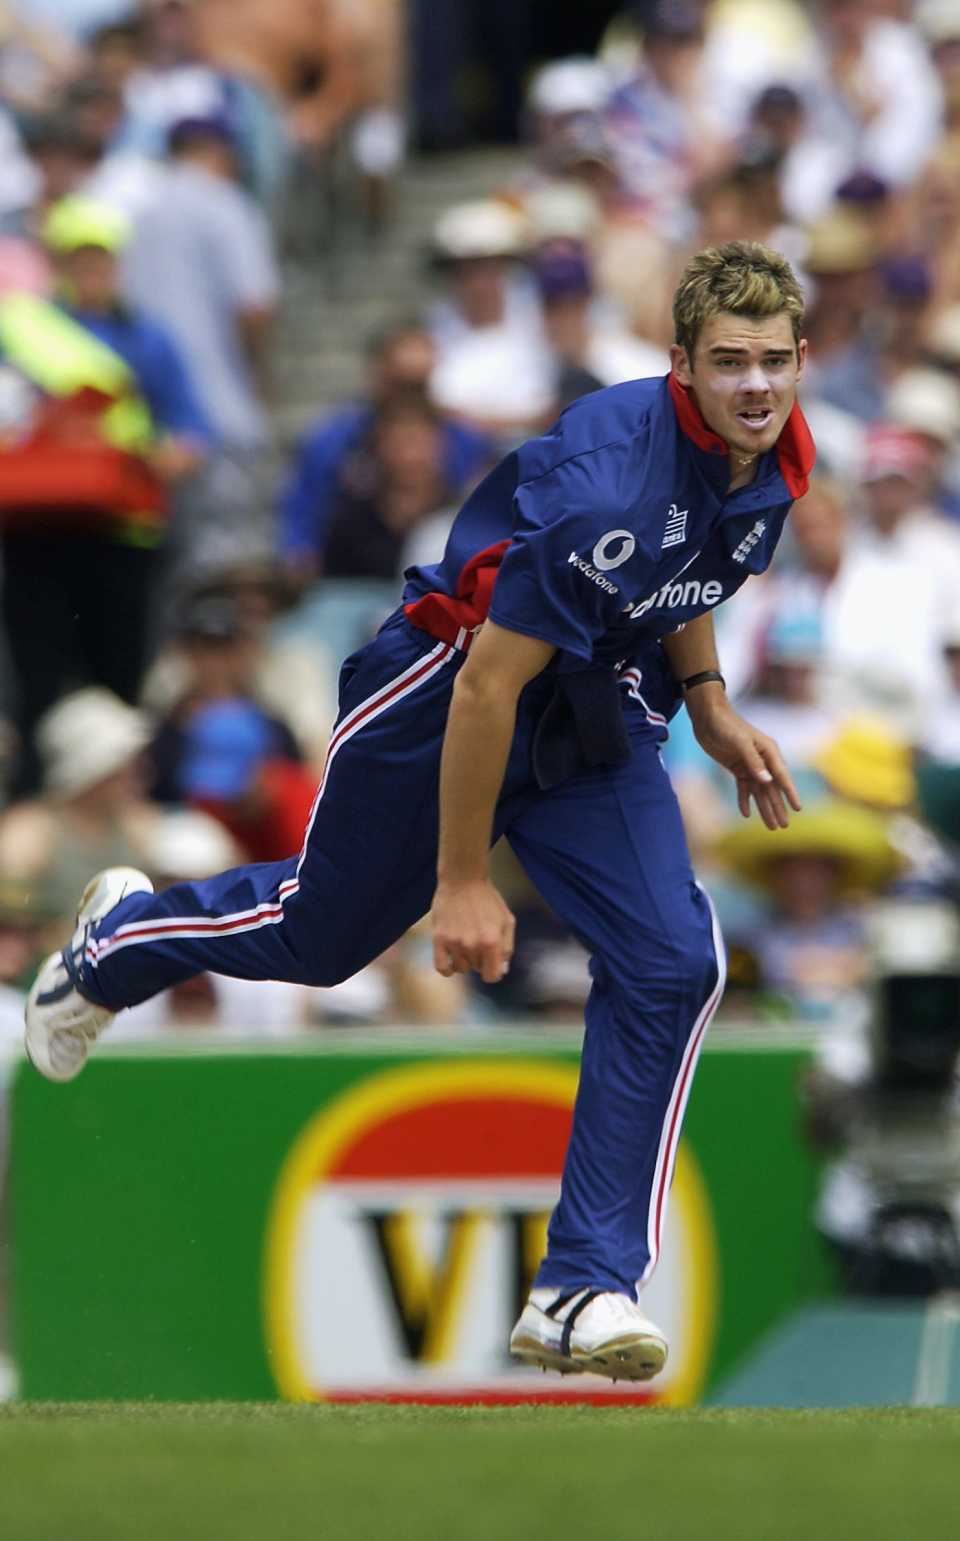 Jimmy Anderson bowls in his first international match